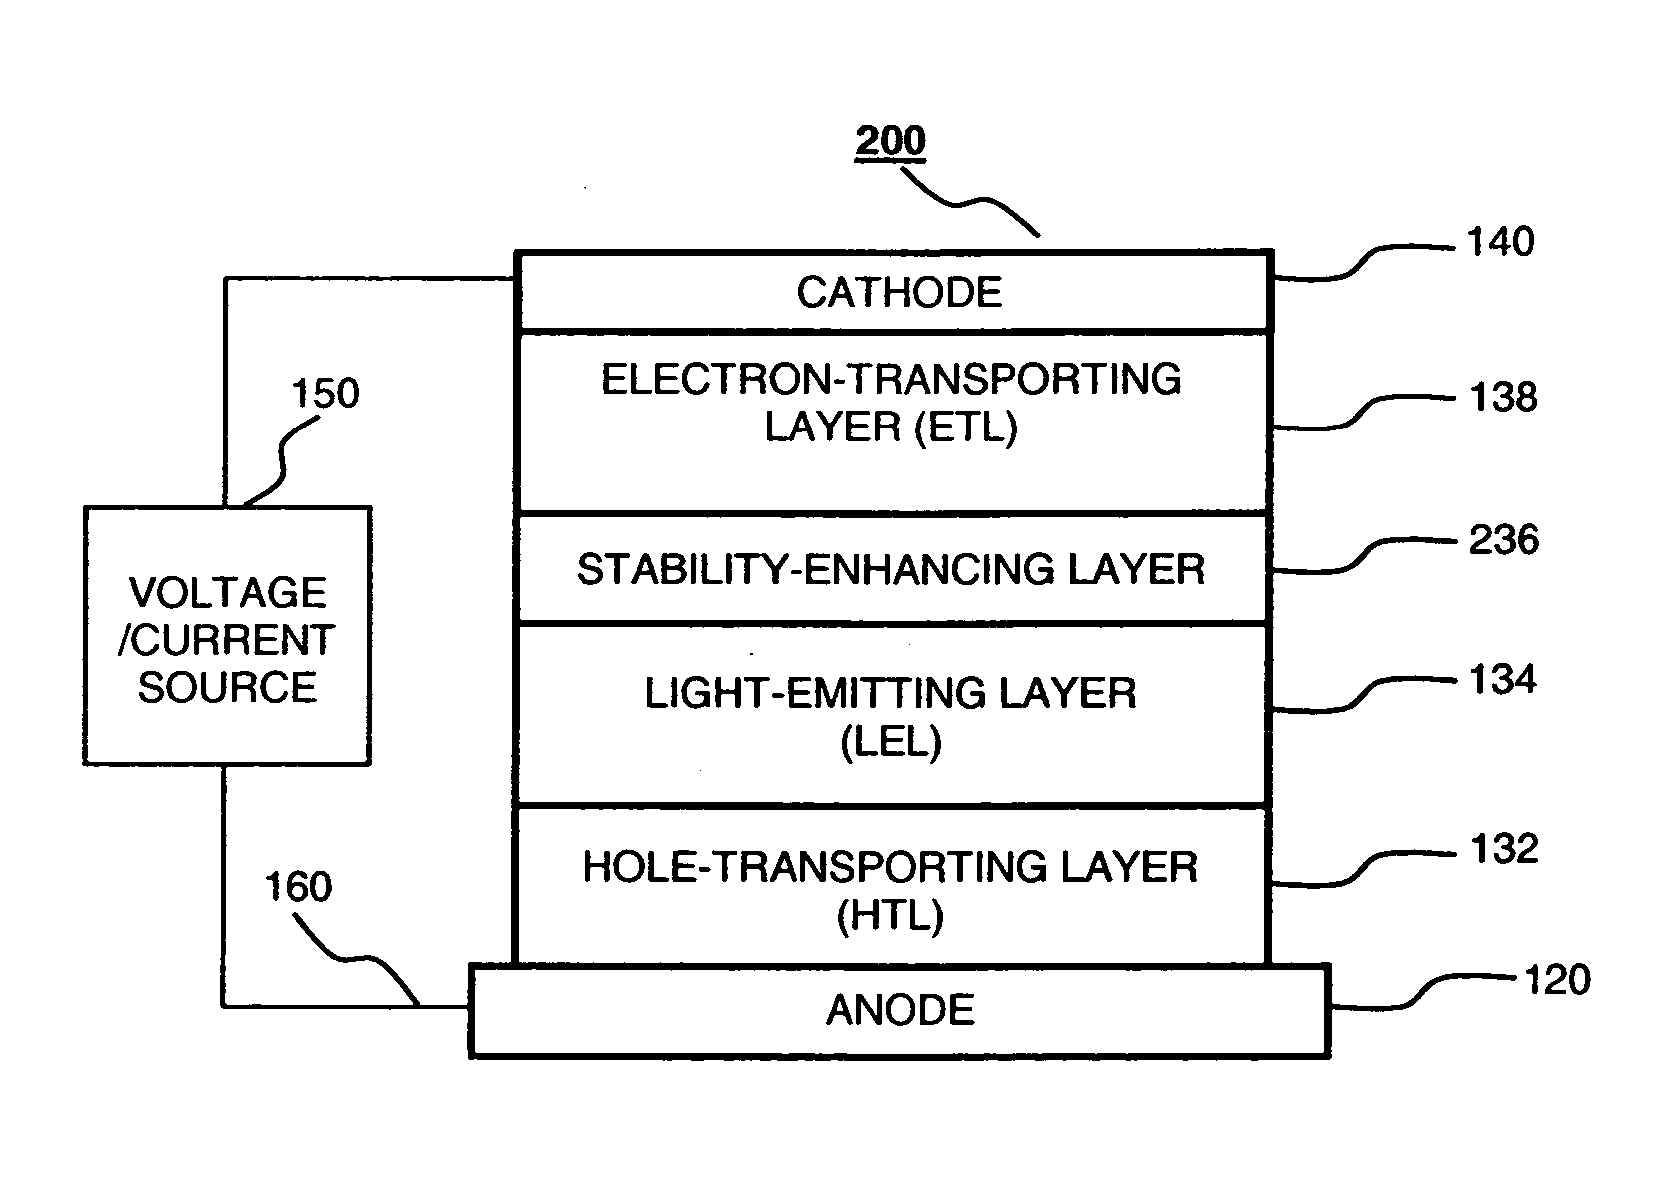 Organic electroluminescent devices having a stability-enhancing layer